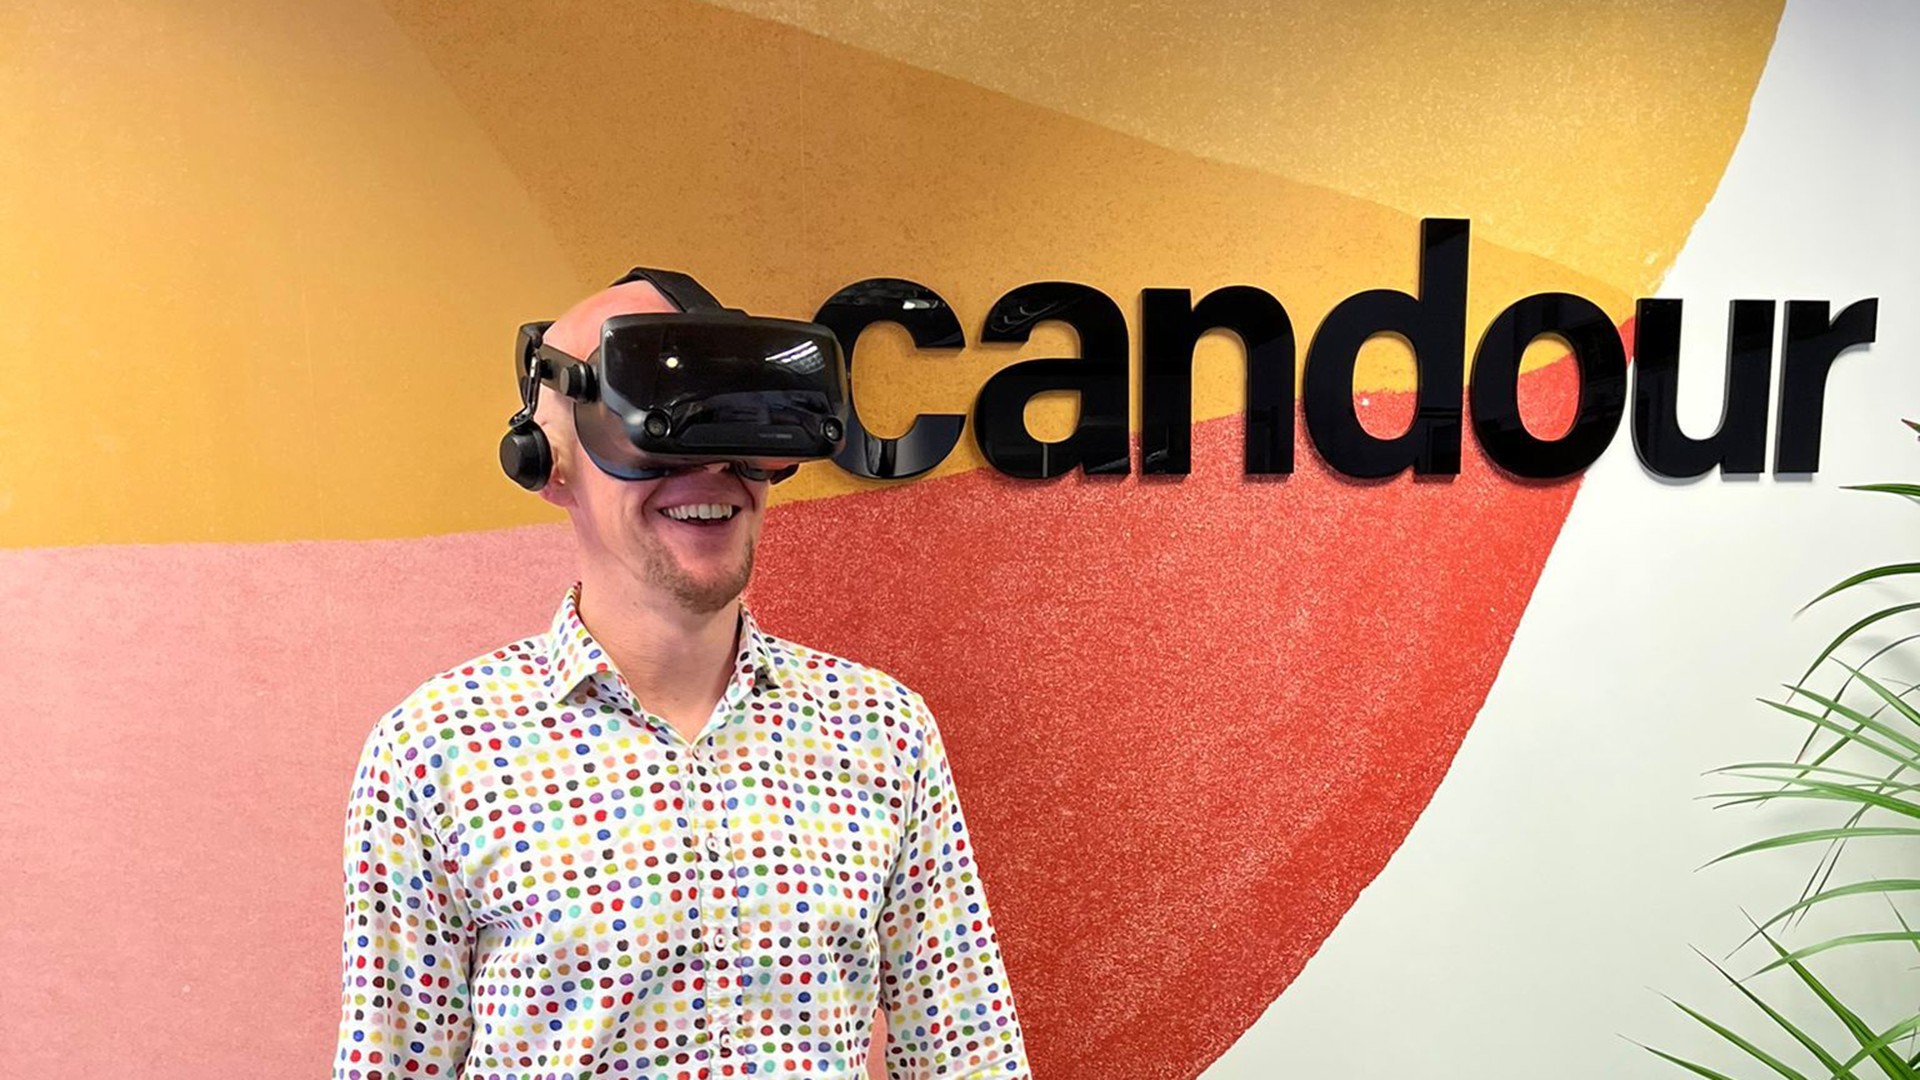 Mark using one of the Valve Index VR headsets